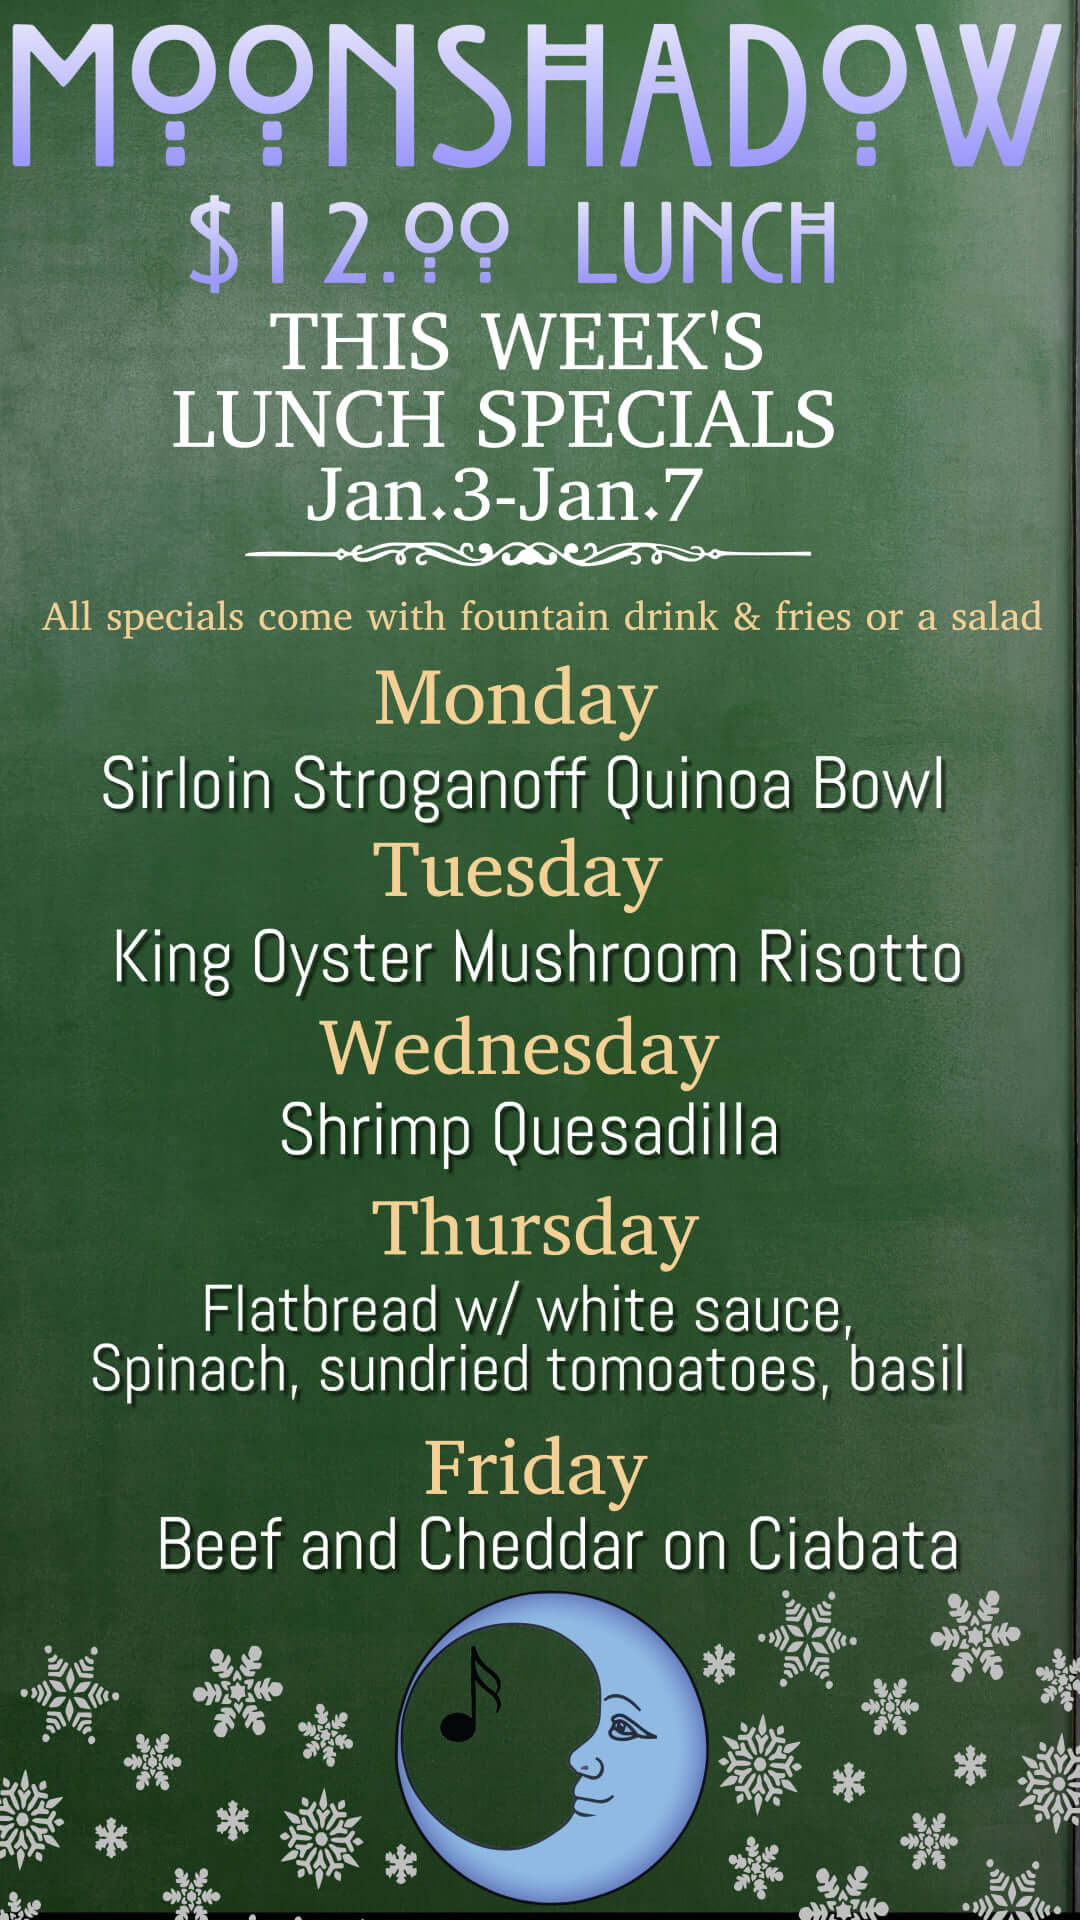 MoonShadow's Lunch Specials